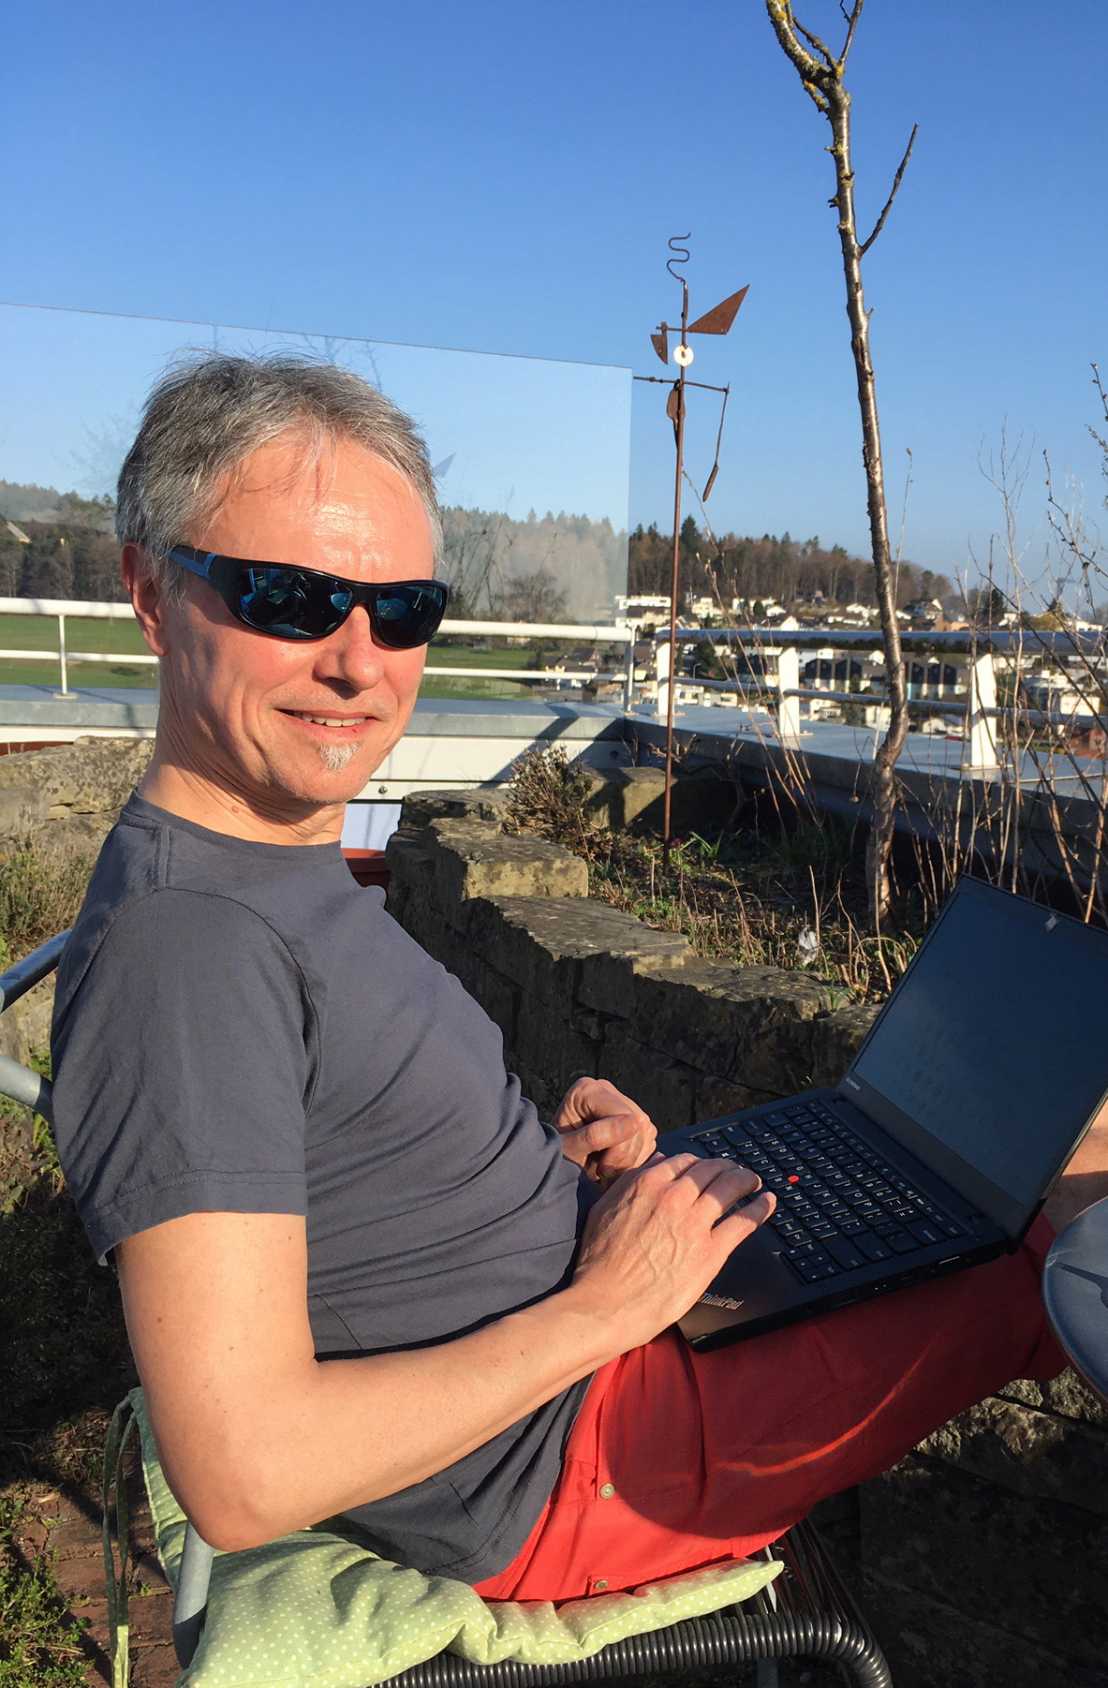 Enlarged view: Prof. Ueli Maurer working from home